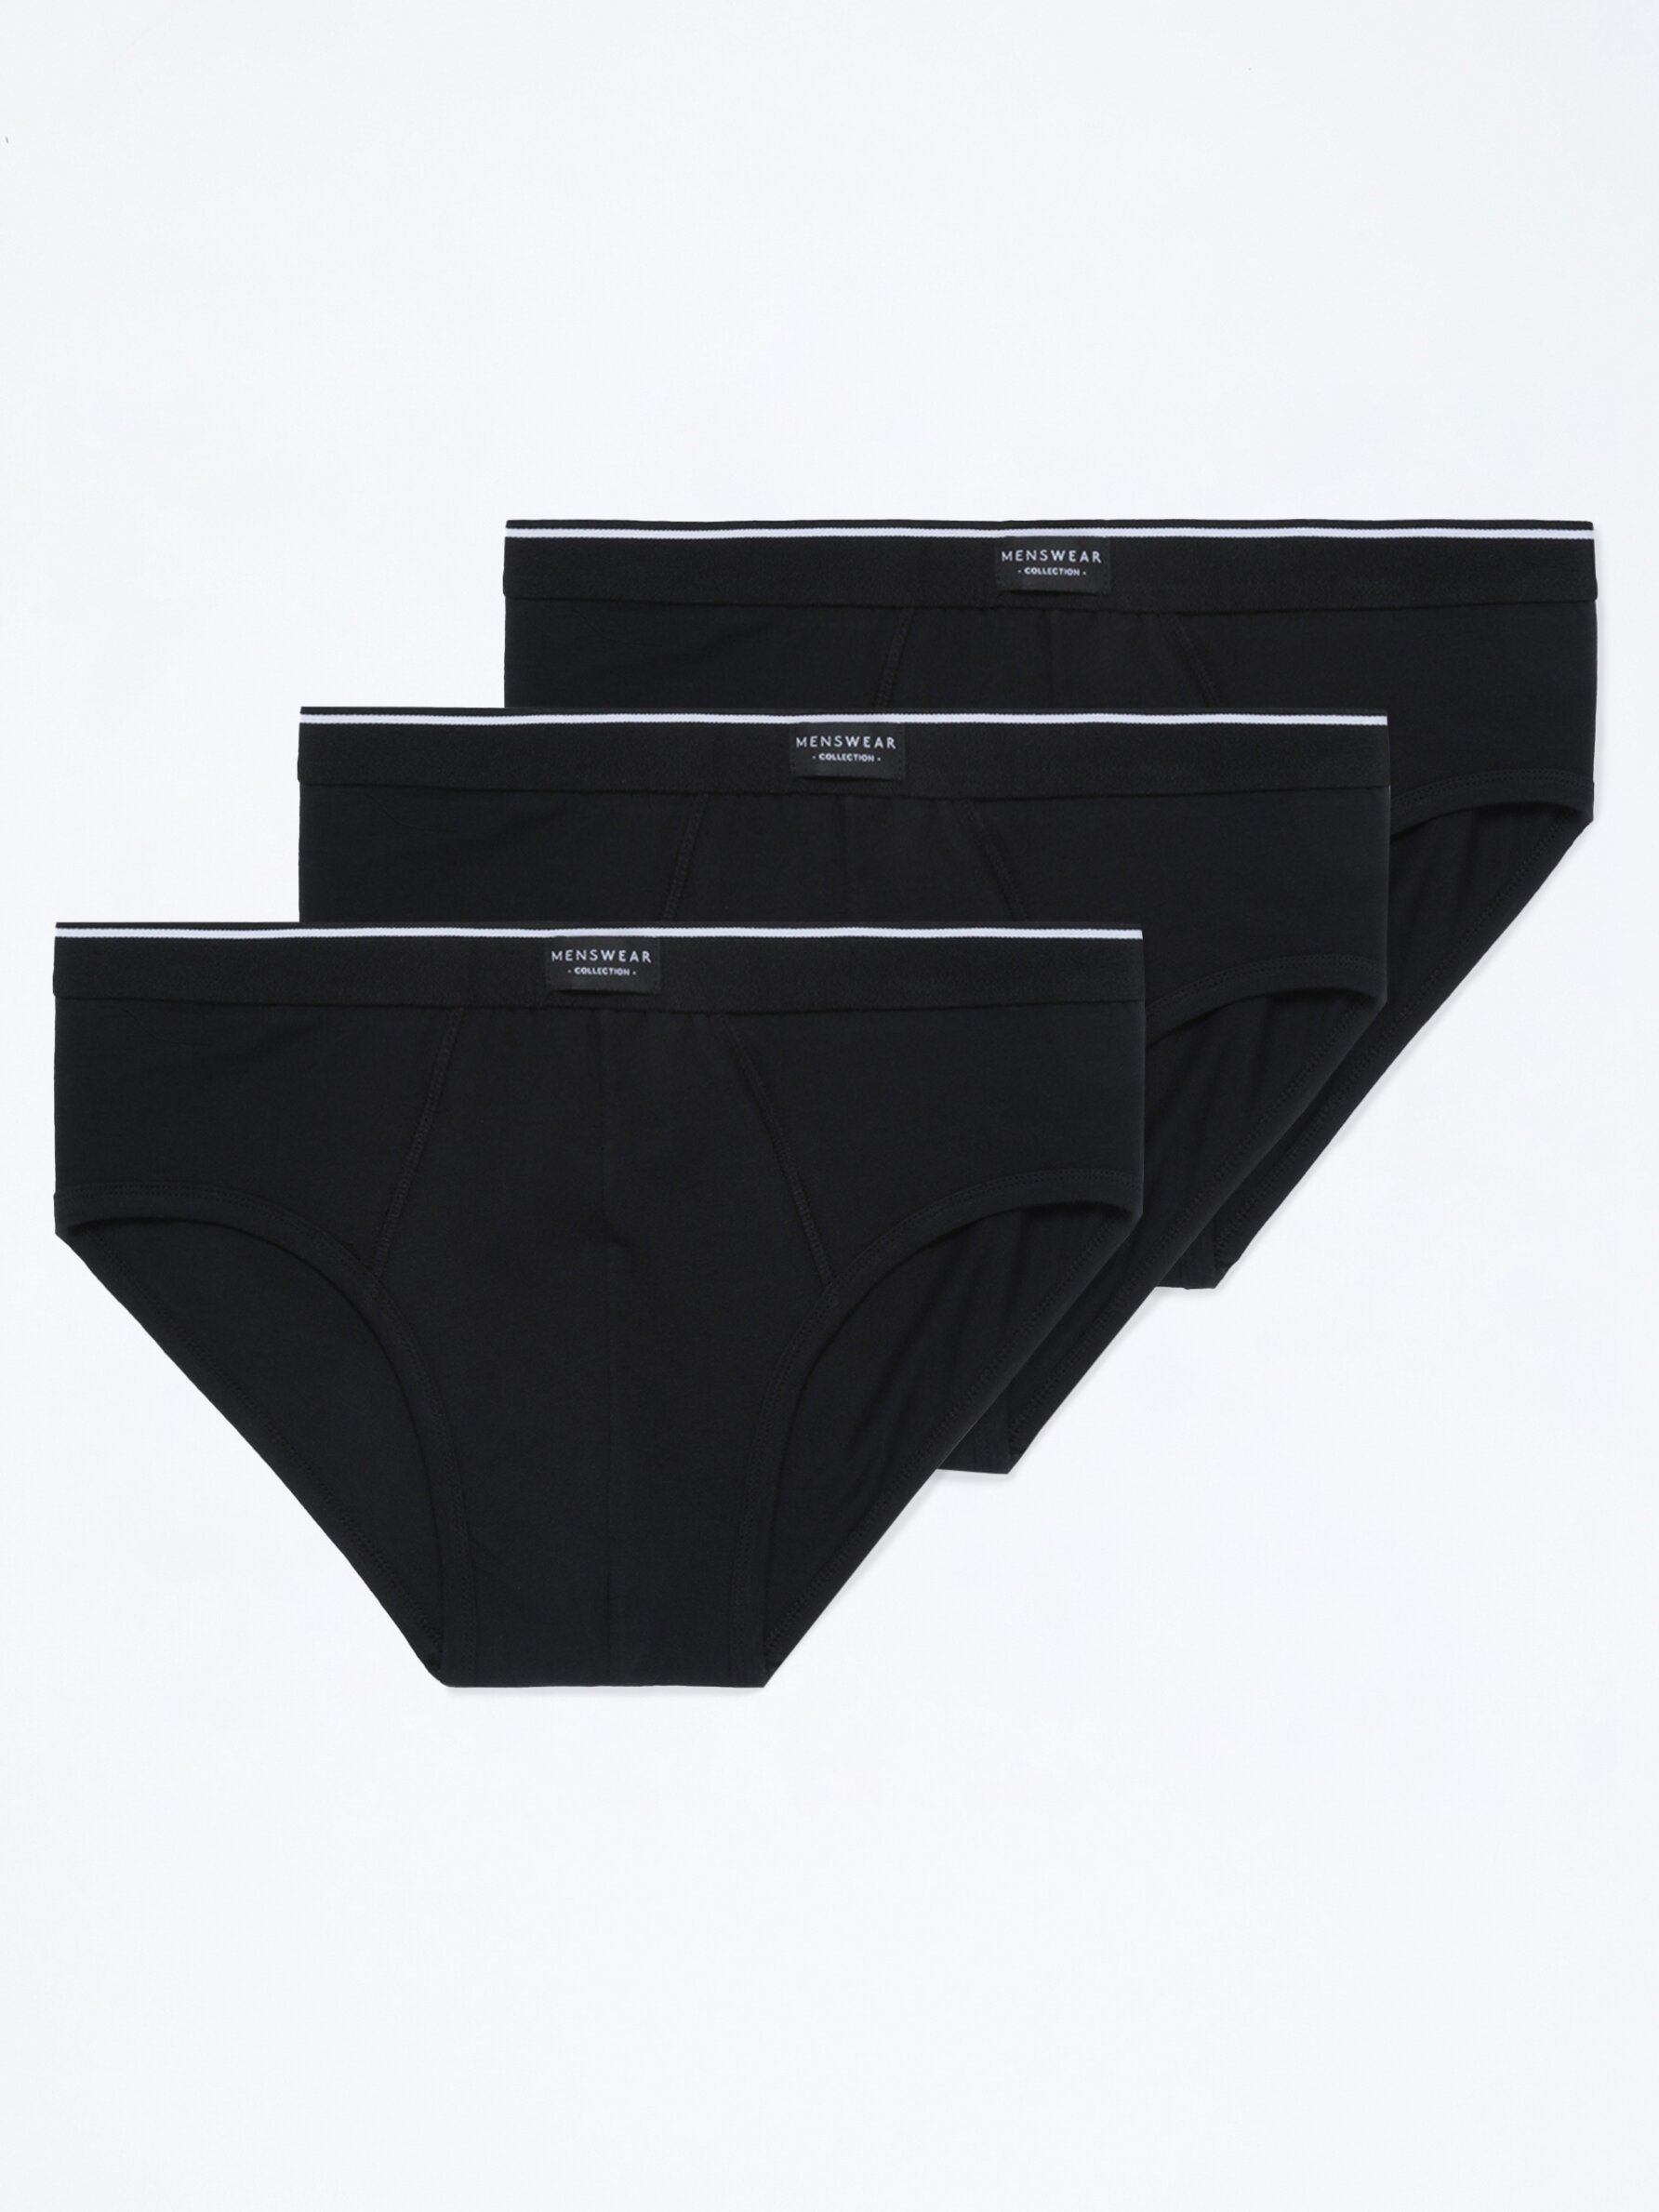 3-6 Men's Underwear Multipack Modal Cotton Briefs No Fly Covered Waistband  Softy